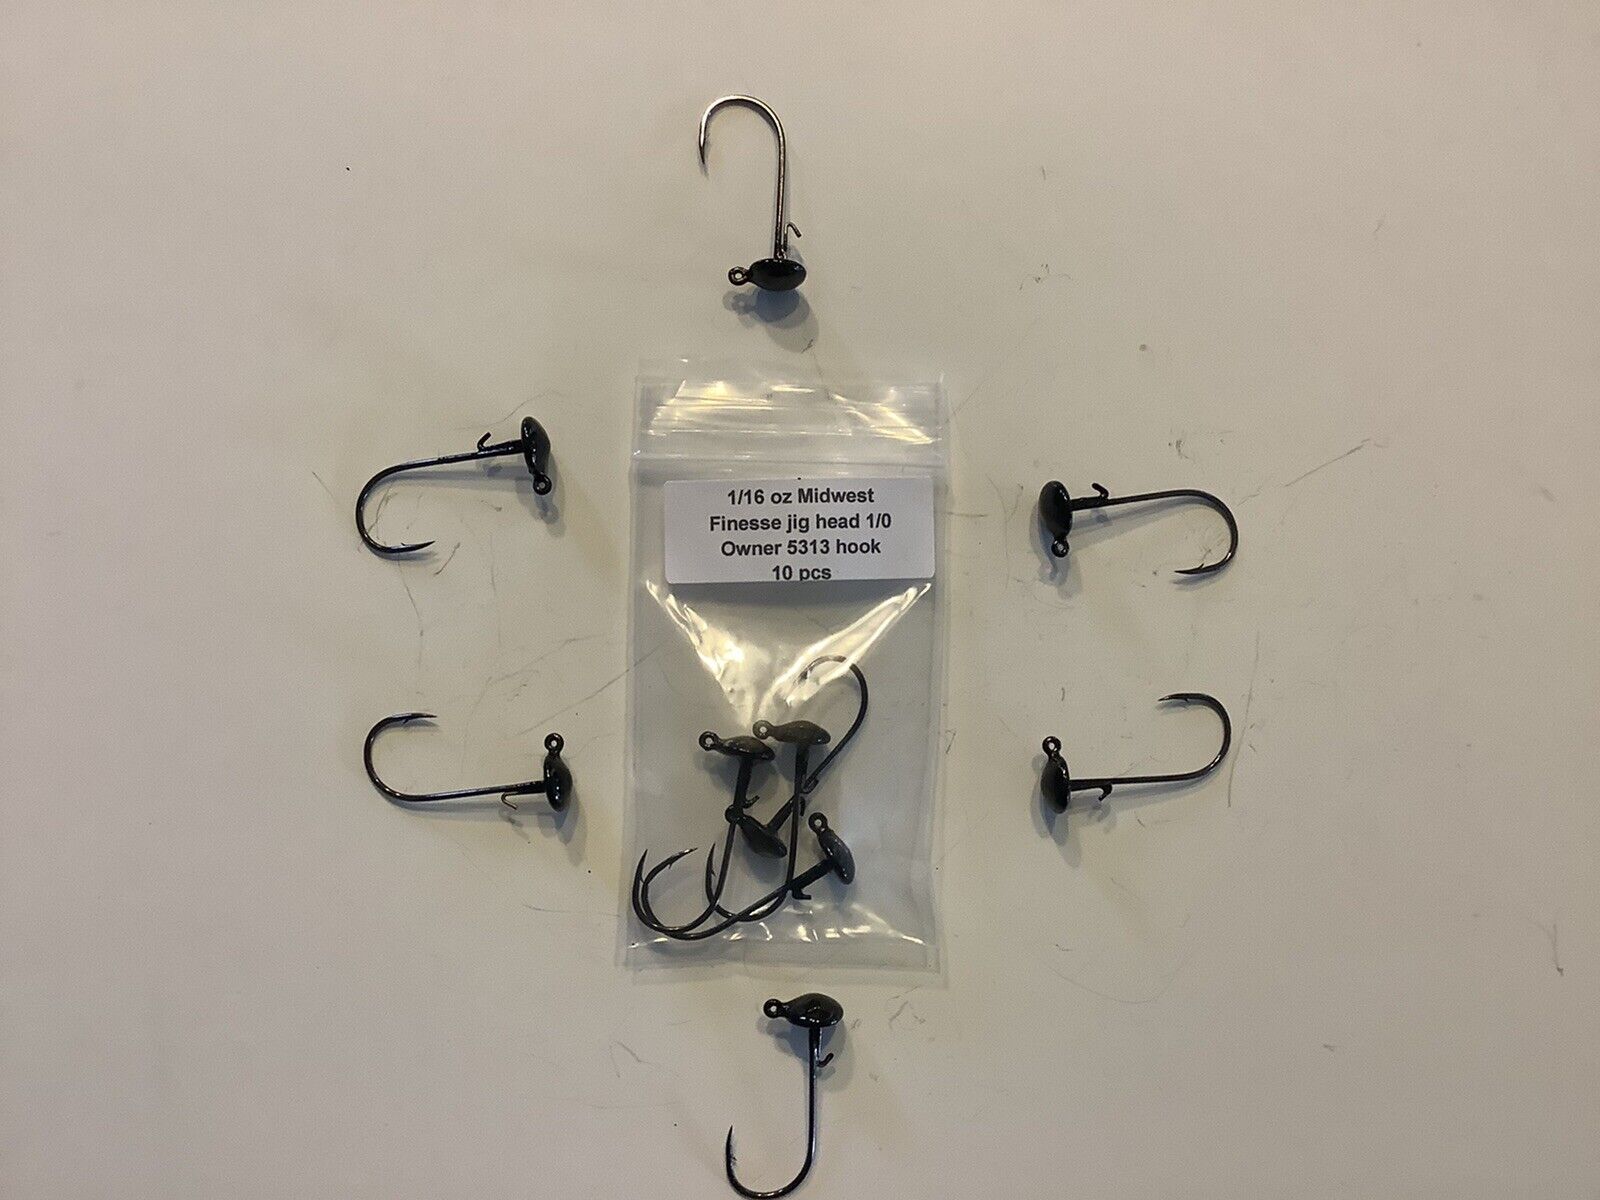 1/16oz Black Ned Midwest Rig/Finesse Jig head 10PK With Strong 1/0 Owner  5313 Hook